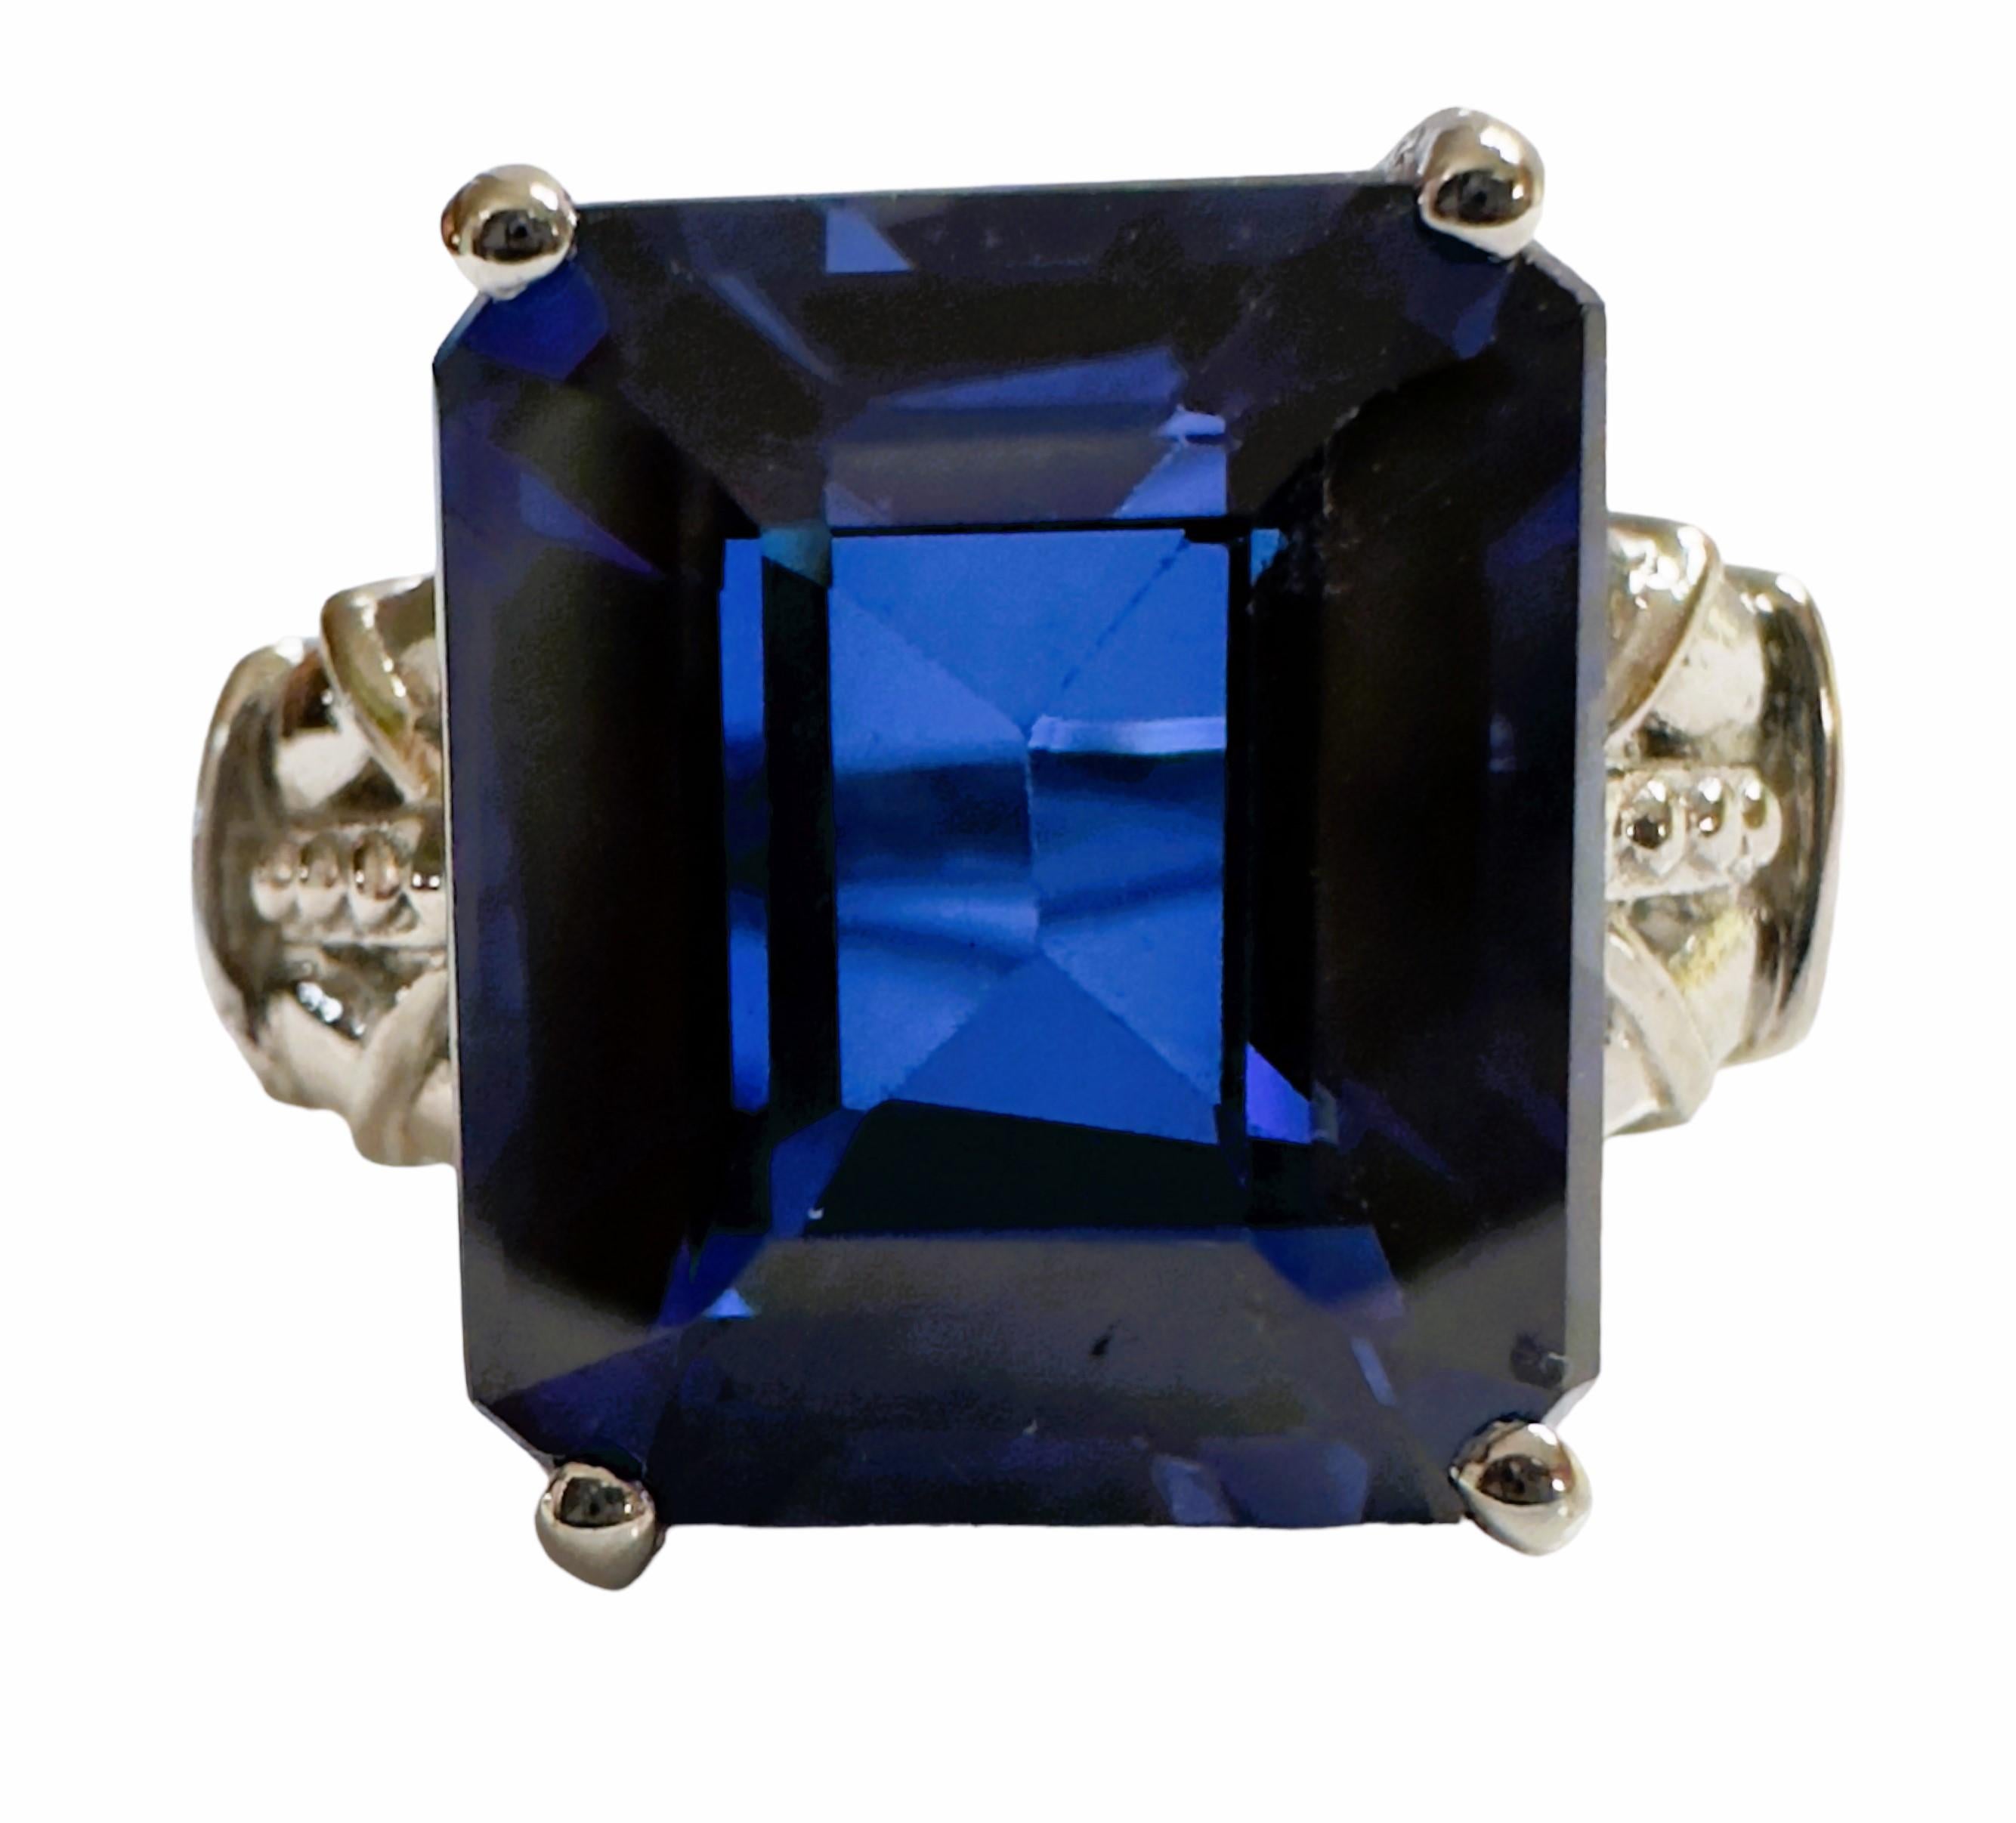 The ring is a size 6.25 and has just a beautiful and brilliant sapphire stone.  It was mined in Africa.  It is a high quality stone. The IF stands for 